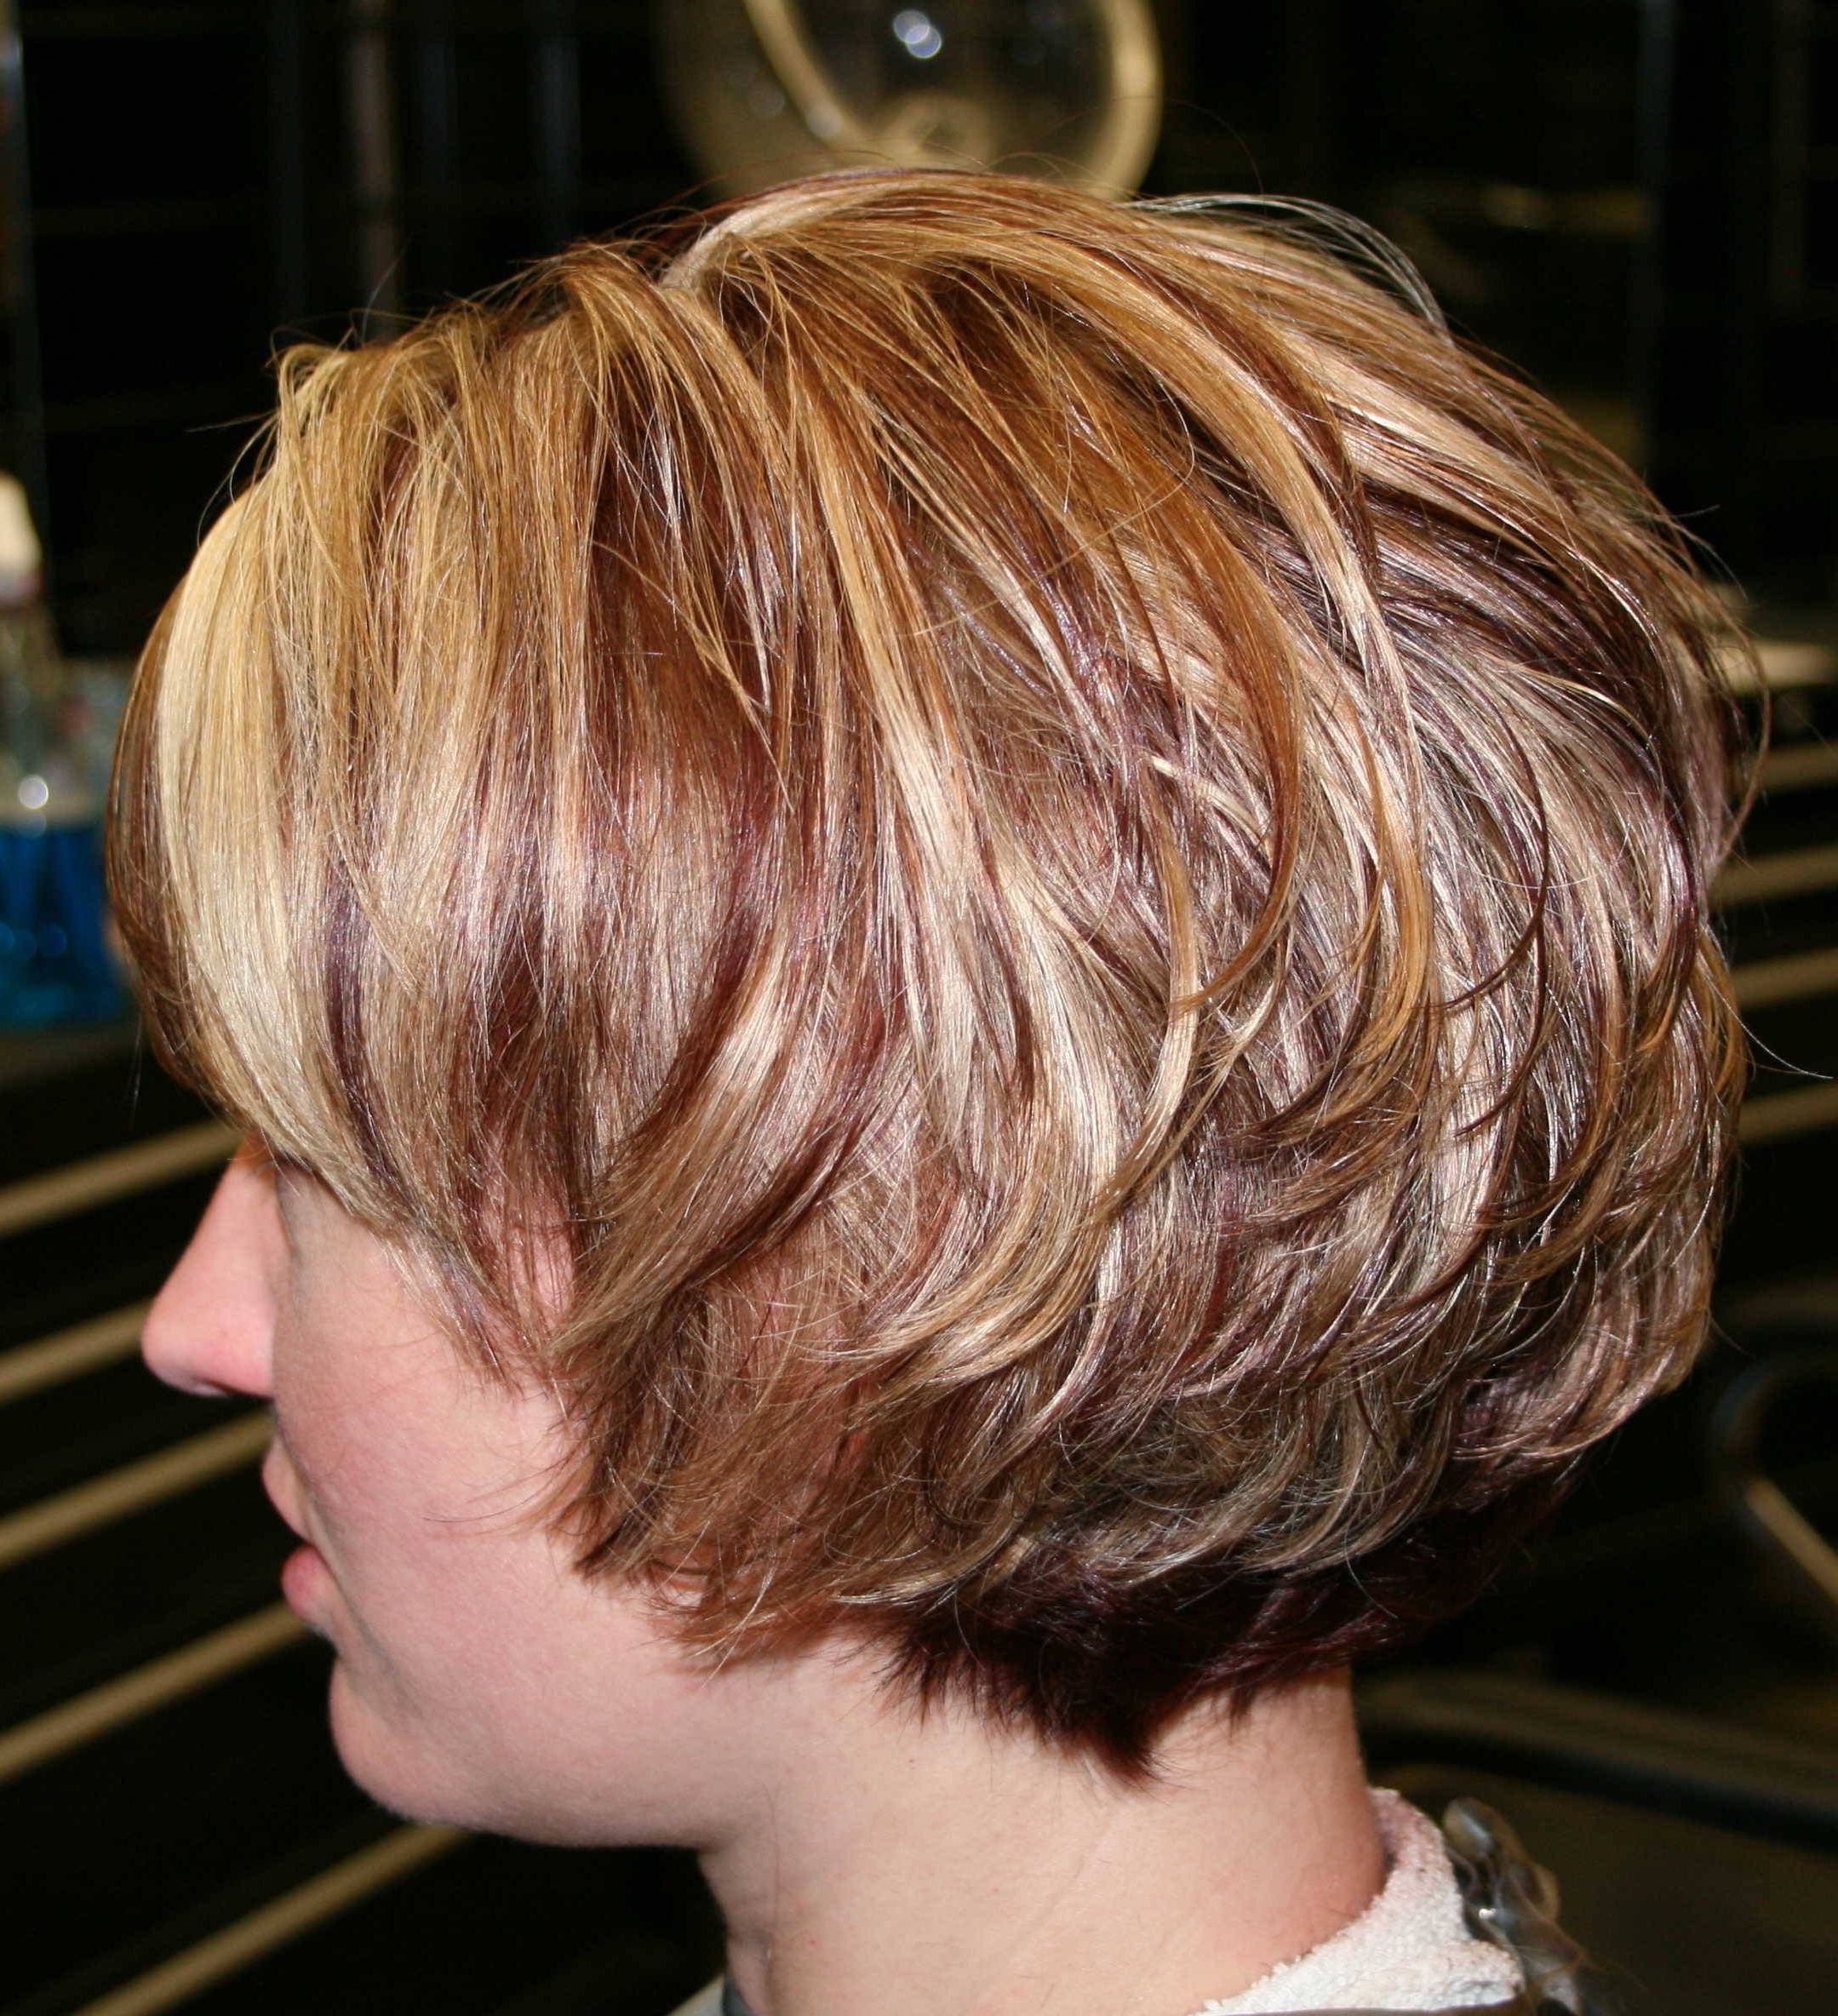 Short Layered Bob Hairstyles For Thick Hair – Hairstyle For Women & Man With Regard To Layered Bob Hairstyles For Thick Hair (View 2 of 20)